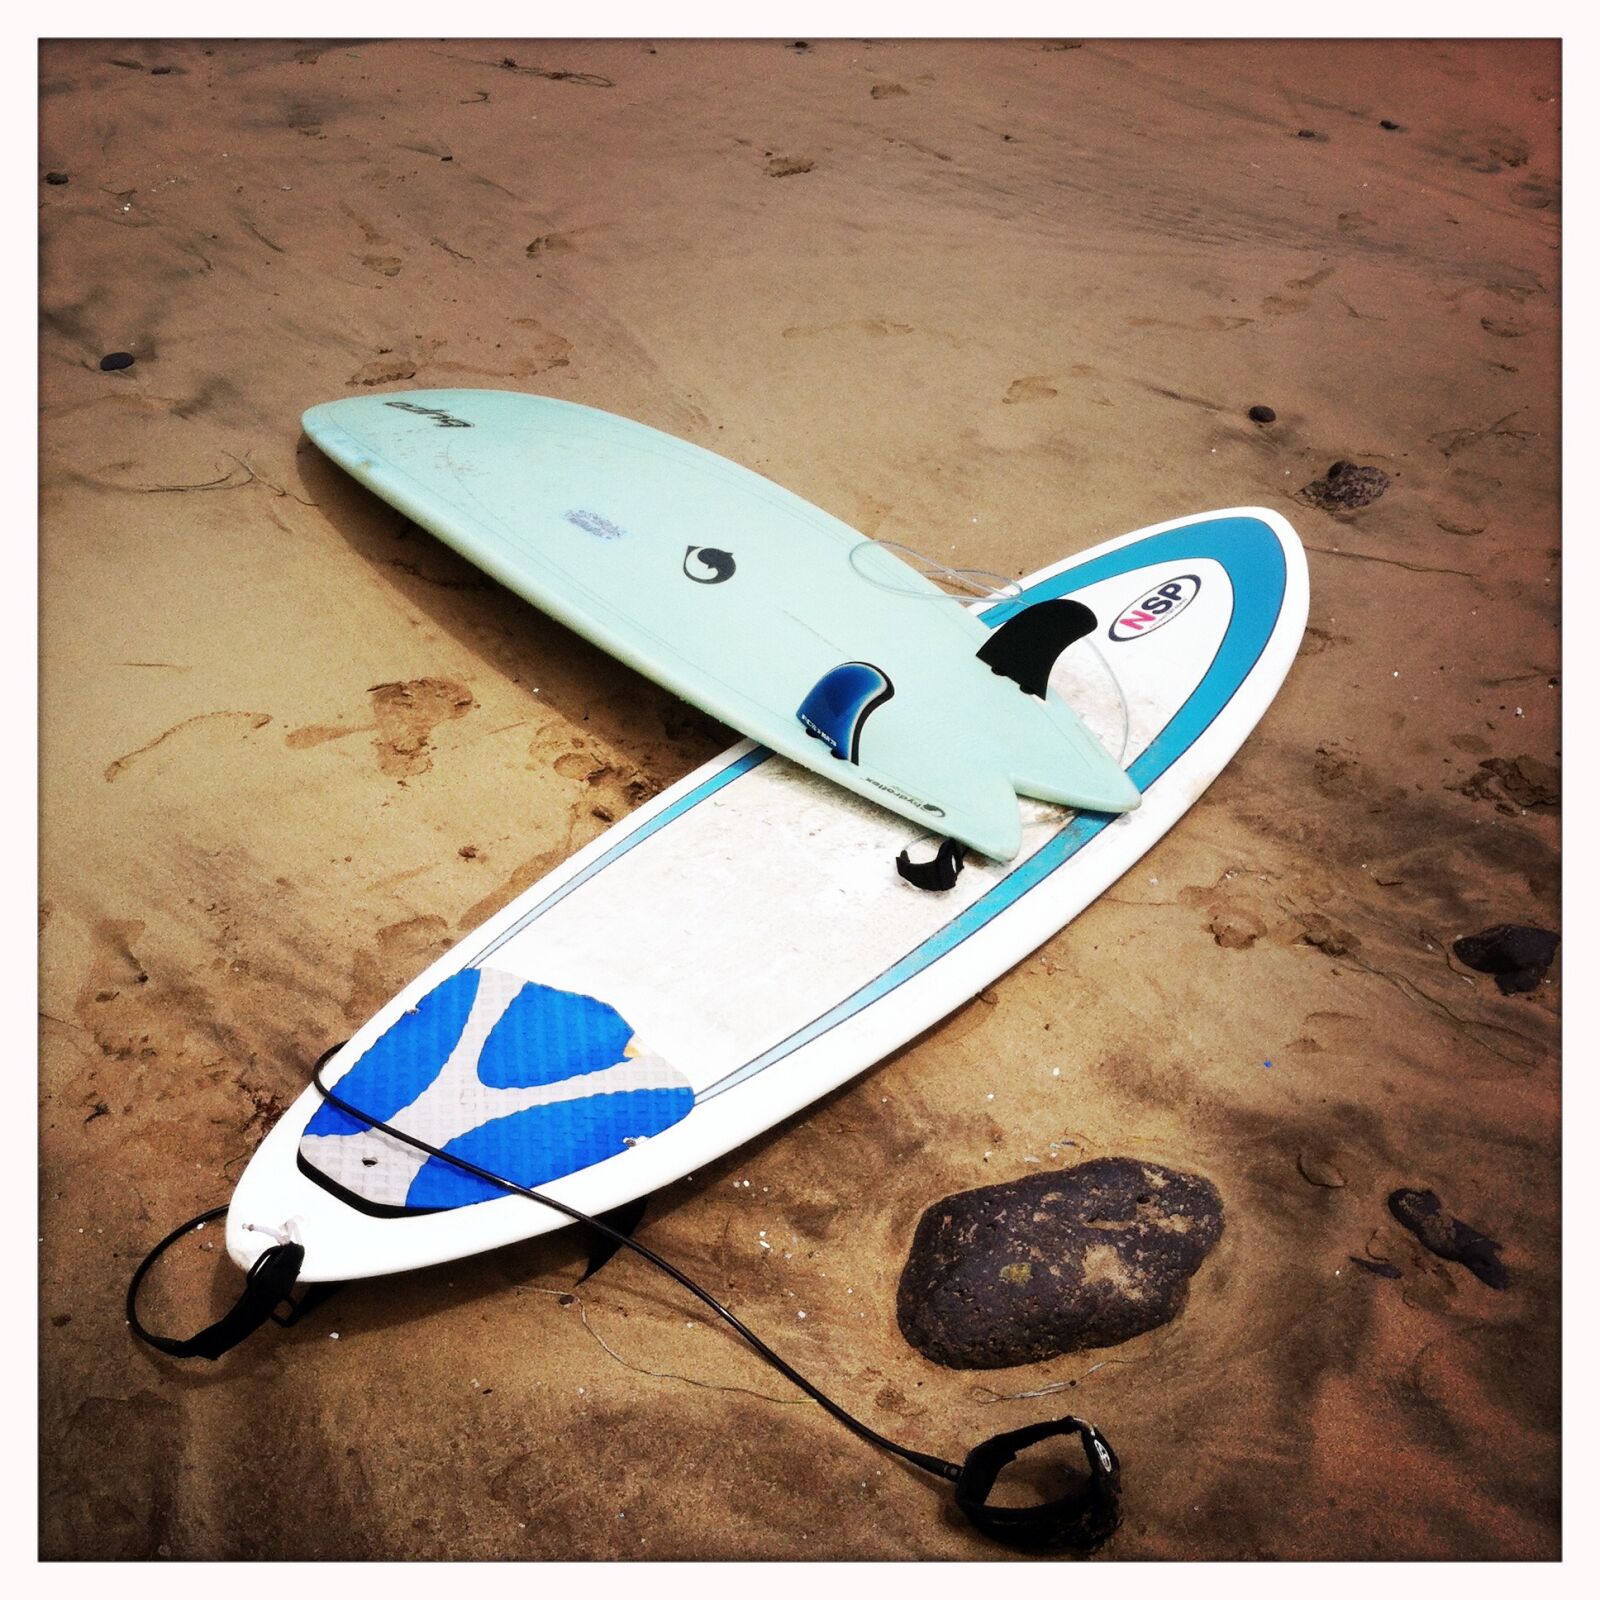 Hipstamatic 277 + iPhone 4 back camera 3.85mm f/2.8 sample photo. Surfboard photography